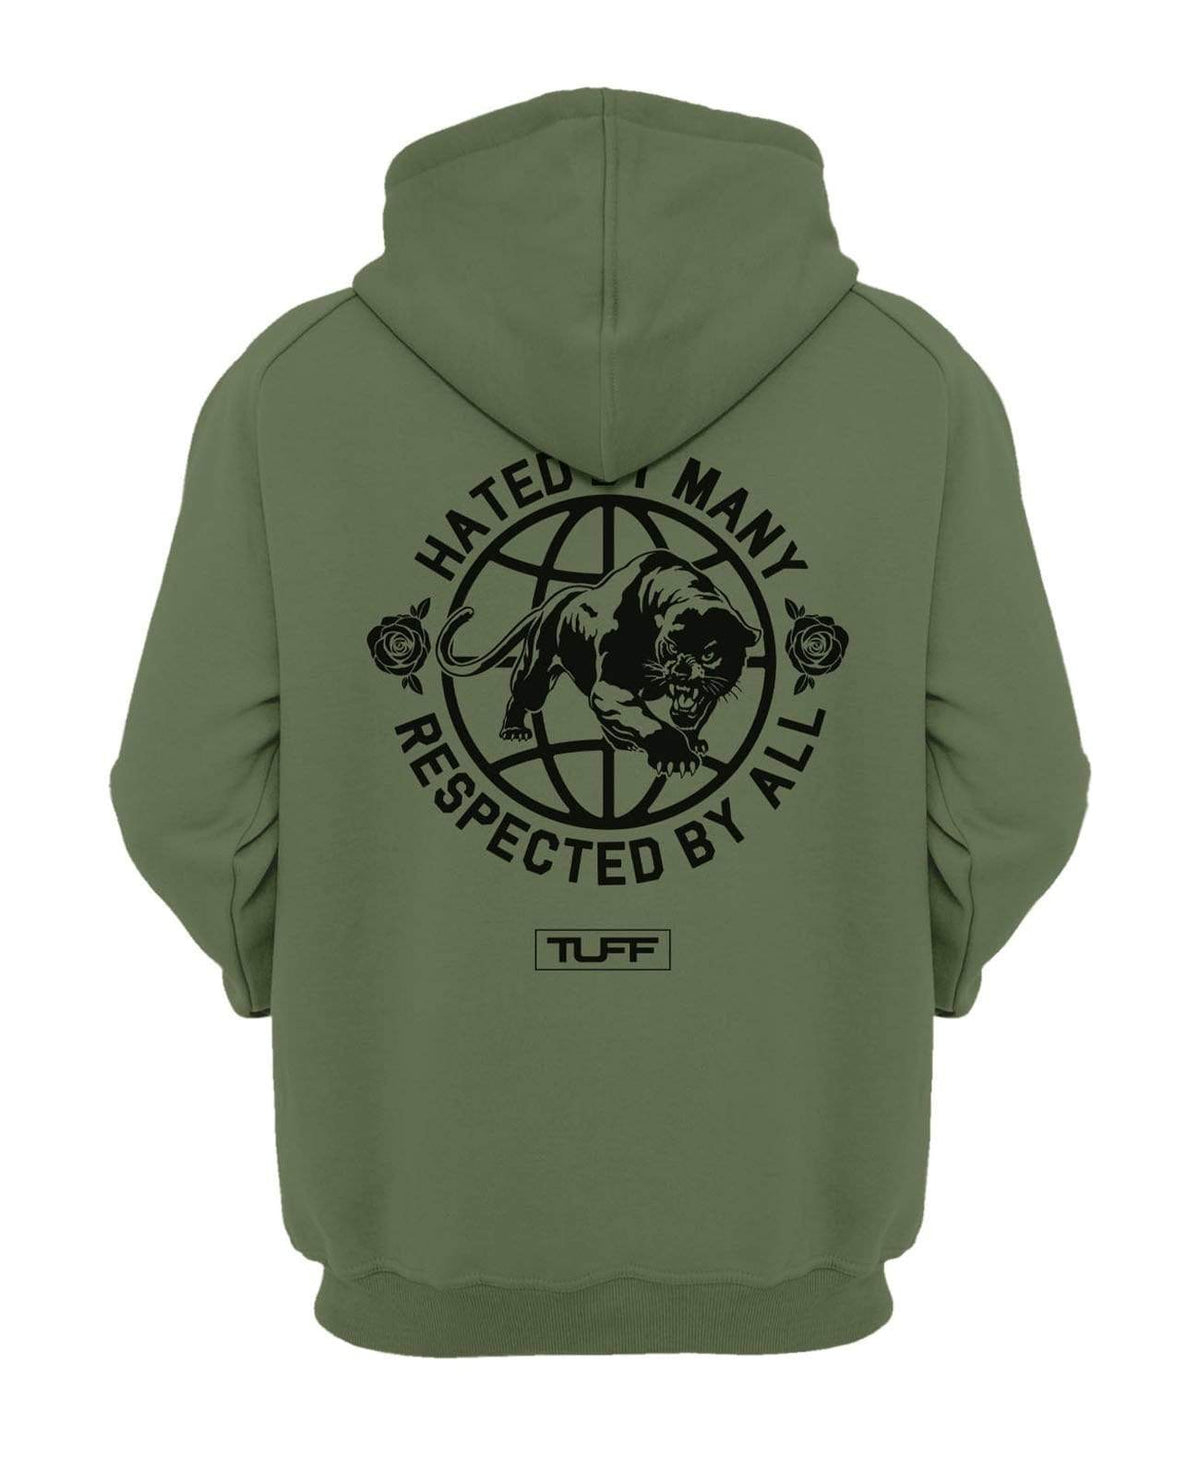 Hated By Many, Respected By All Hooded Sweatshirt XS / Military Green TuffWraps.com